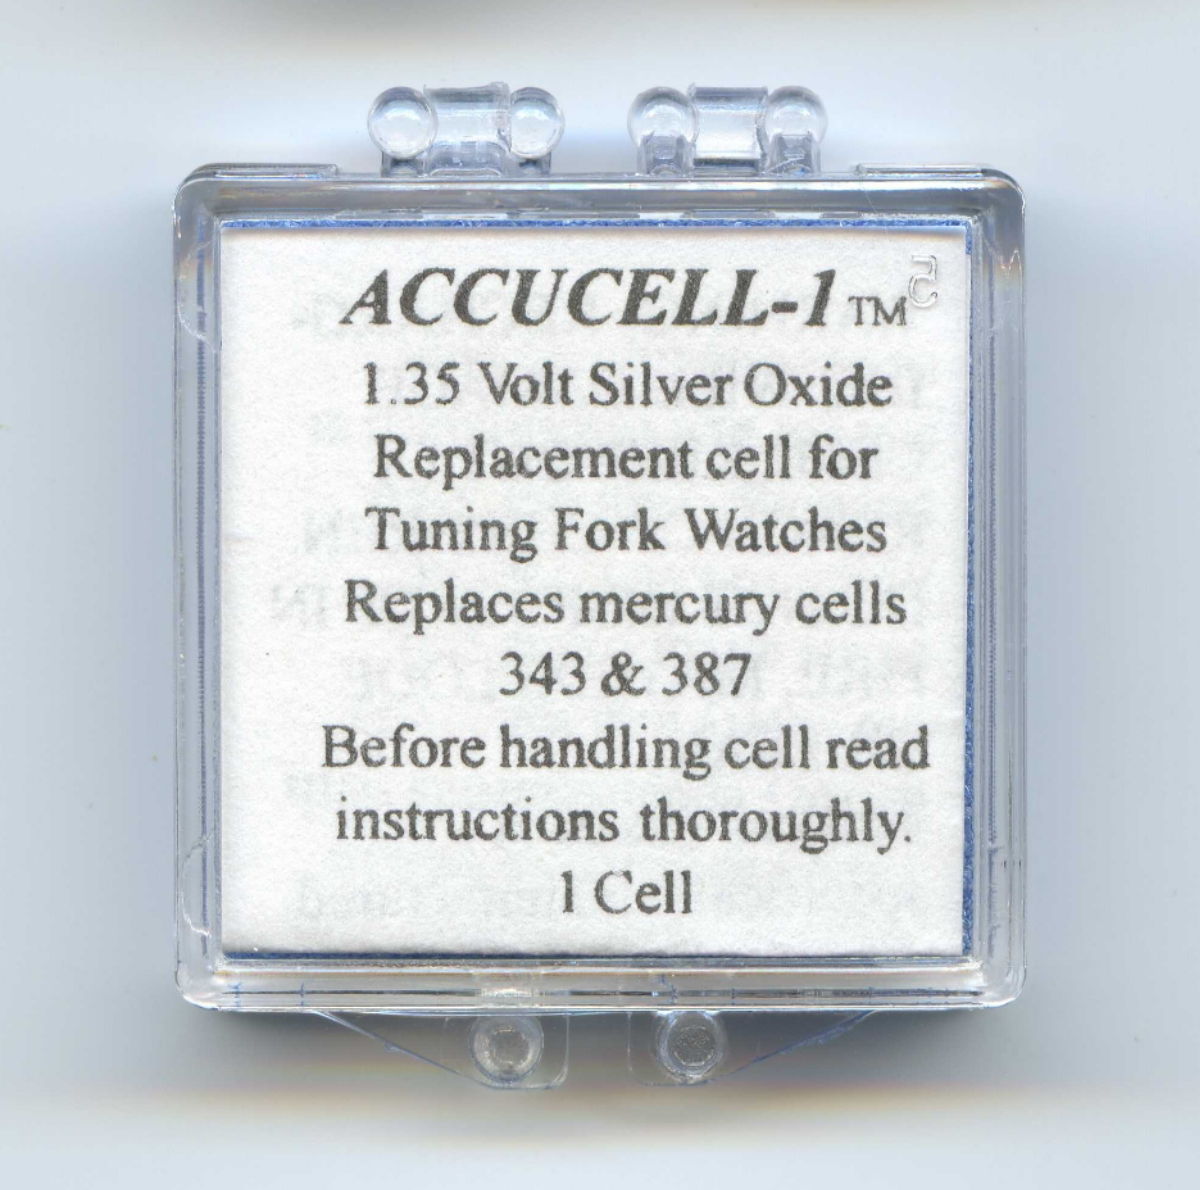 Bulova Accutron Accucell1 battery.